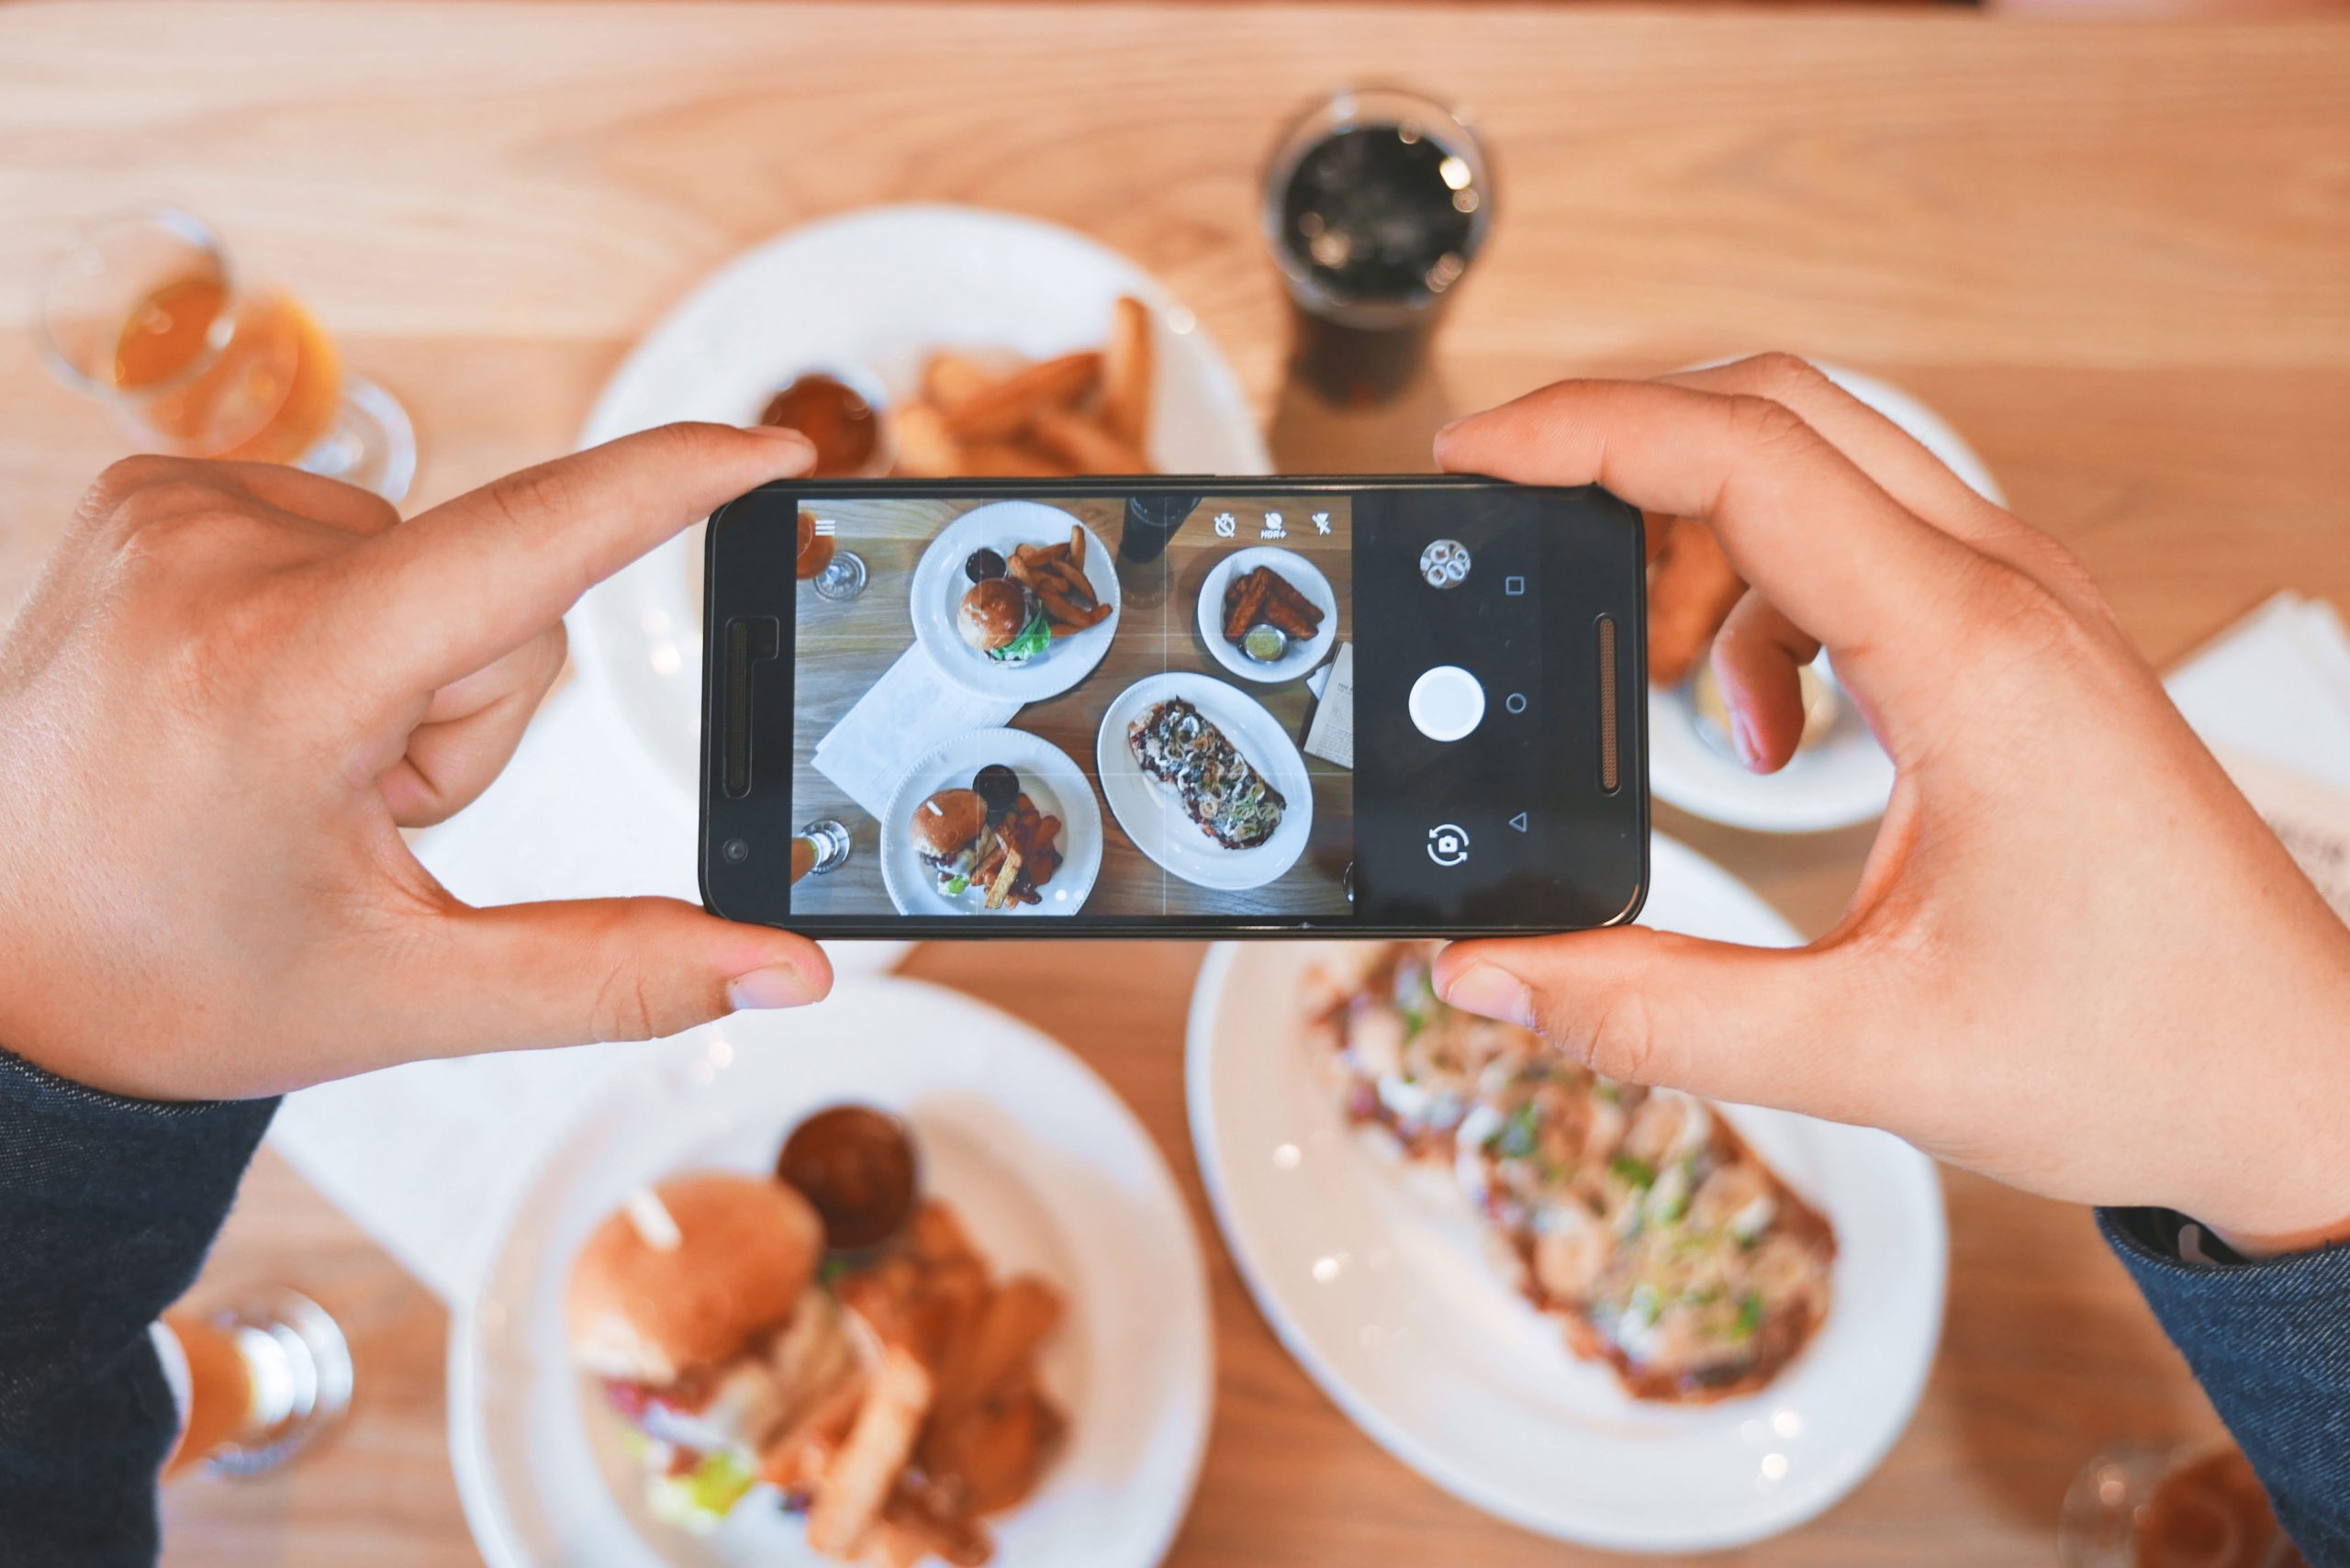 4 Quick Actions to Improve Your Brand on Instagram